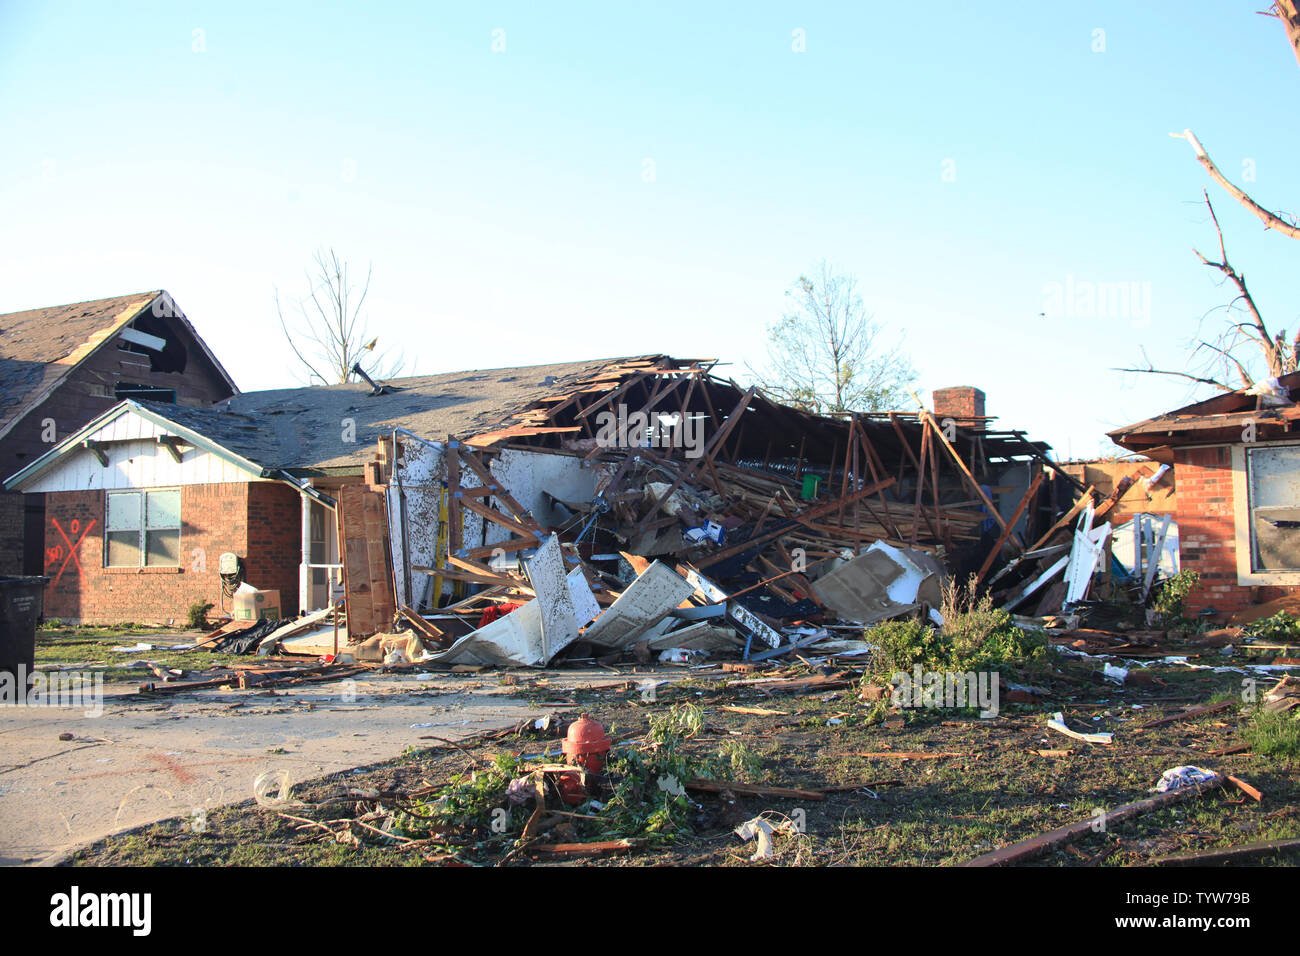 Destruction from the May 20 tornado that hit Moore, Oklahoma is seen on May 22, 2013. The EF-5 tornado cut a path of destruction approximately 17 miles by 1.3 miles wide and left 24 people dead.  UPI/J.P. Wilson Stock Photo